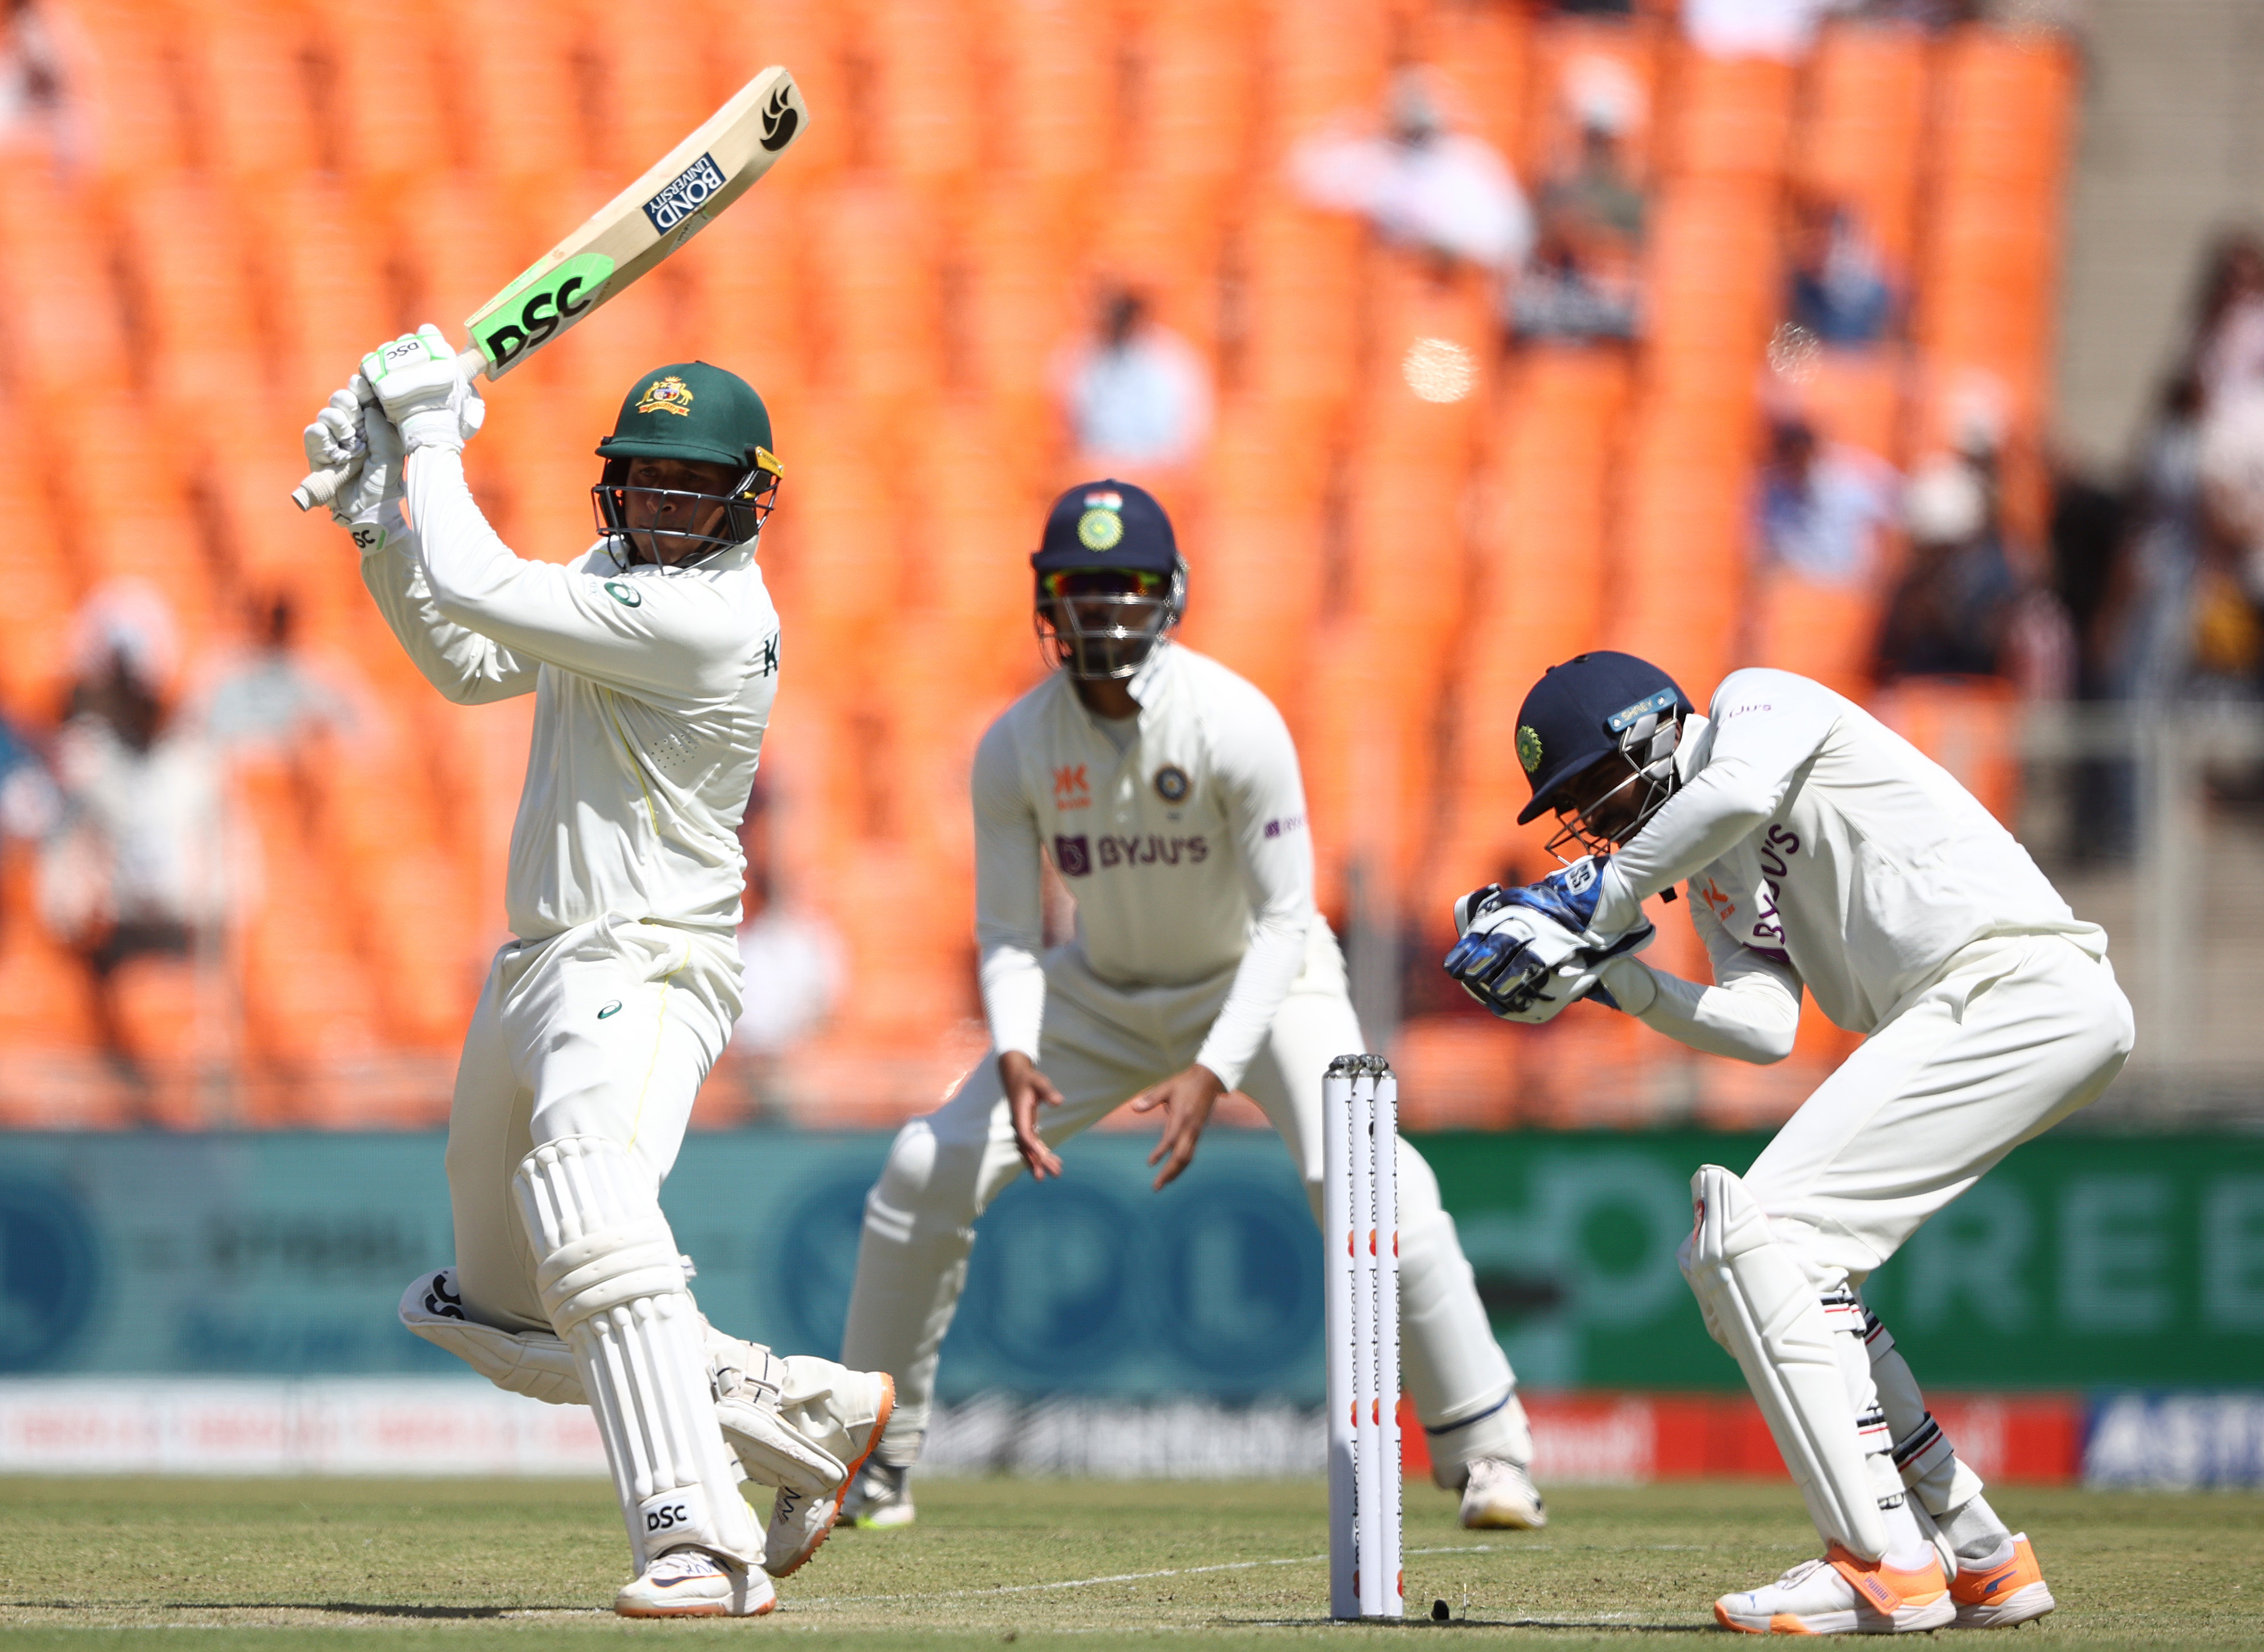 AHMEDABAD, INDIA - MARCH 09: Usman Khawaja of Australia bats during day one of the Fourth Test match in the series between India and Australia at Sardar Patel Stadium on March 09, 2023 in Ahmedabad, India. (Photo by Robert Cianflone/Getty Images)